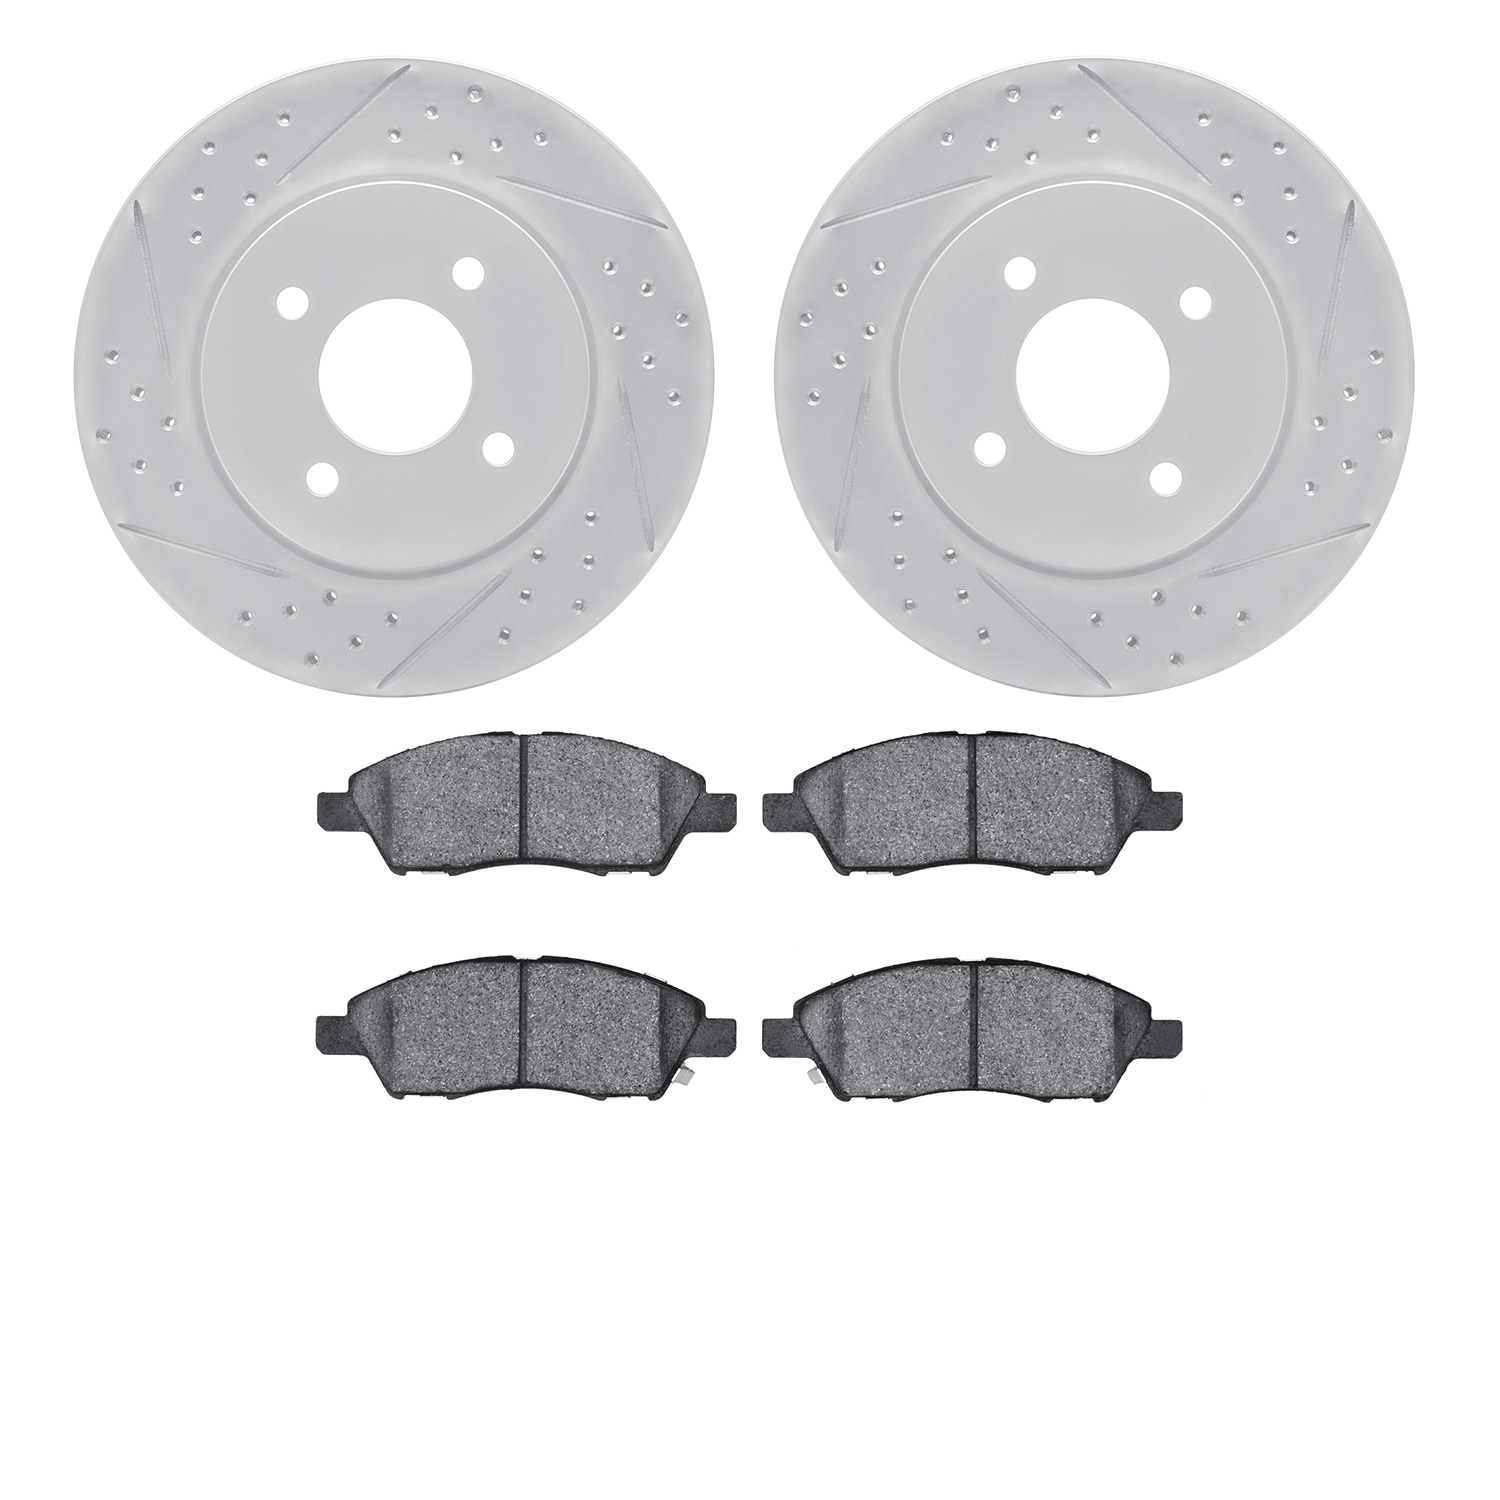 2502-67039 Geoperformance Drilled/Slotted Rotors w/5000 Advanced Brake Pads Kit, 2012-2019 Infiniti/Nissan, Position: Front